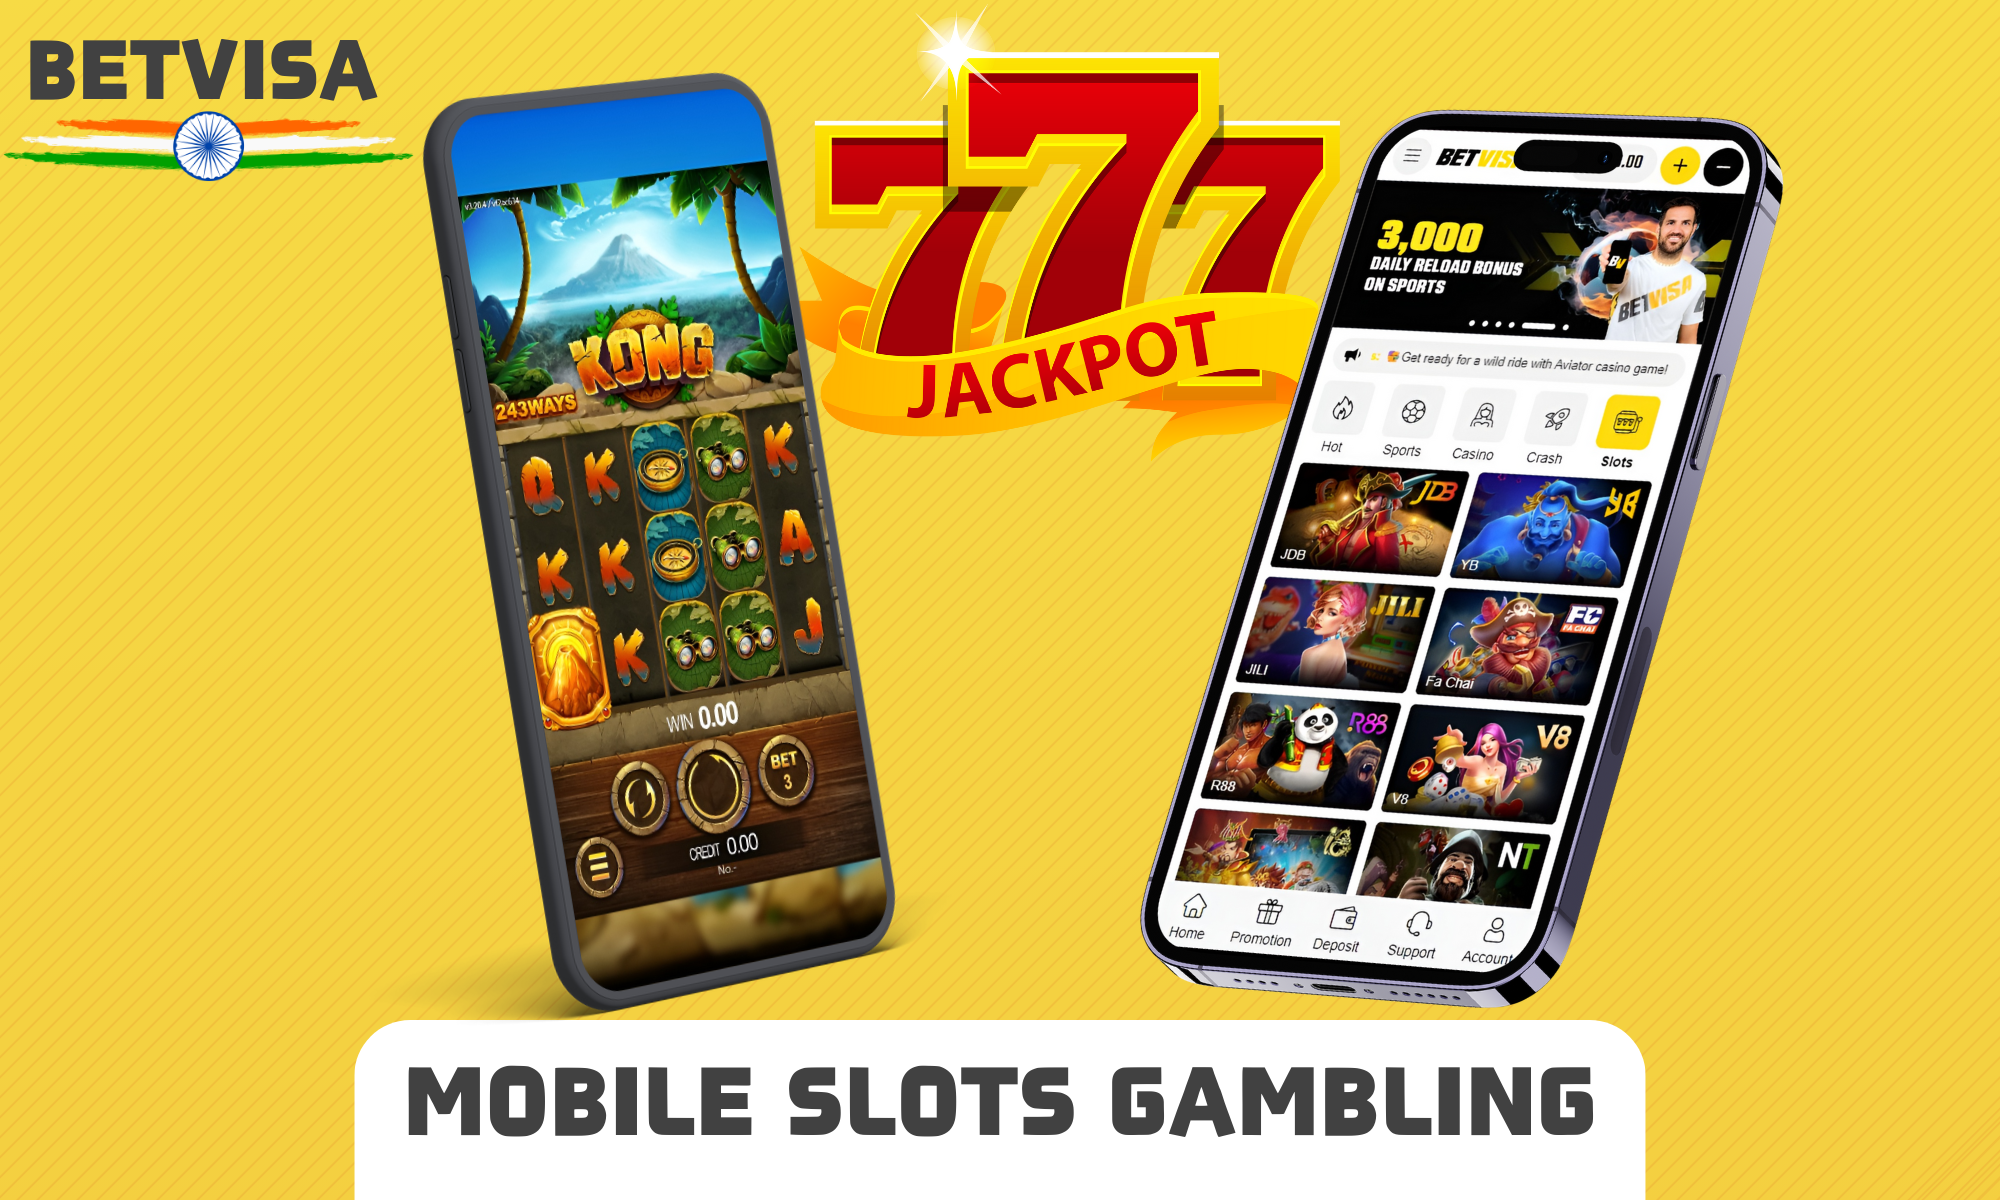 Betvisa gives you the opportunity to play slots on mobile phones